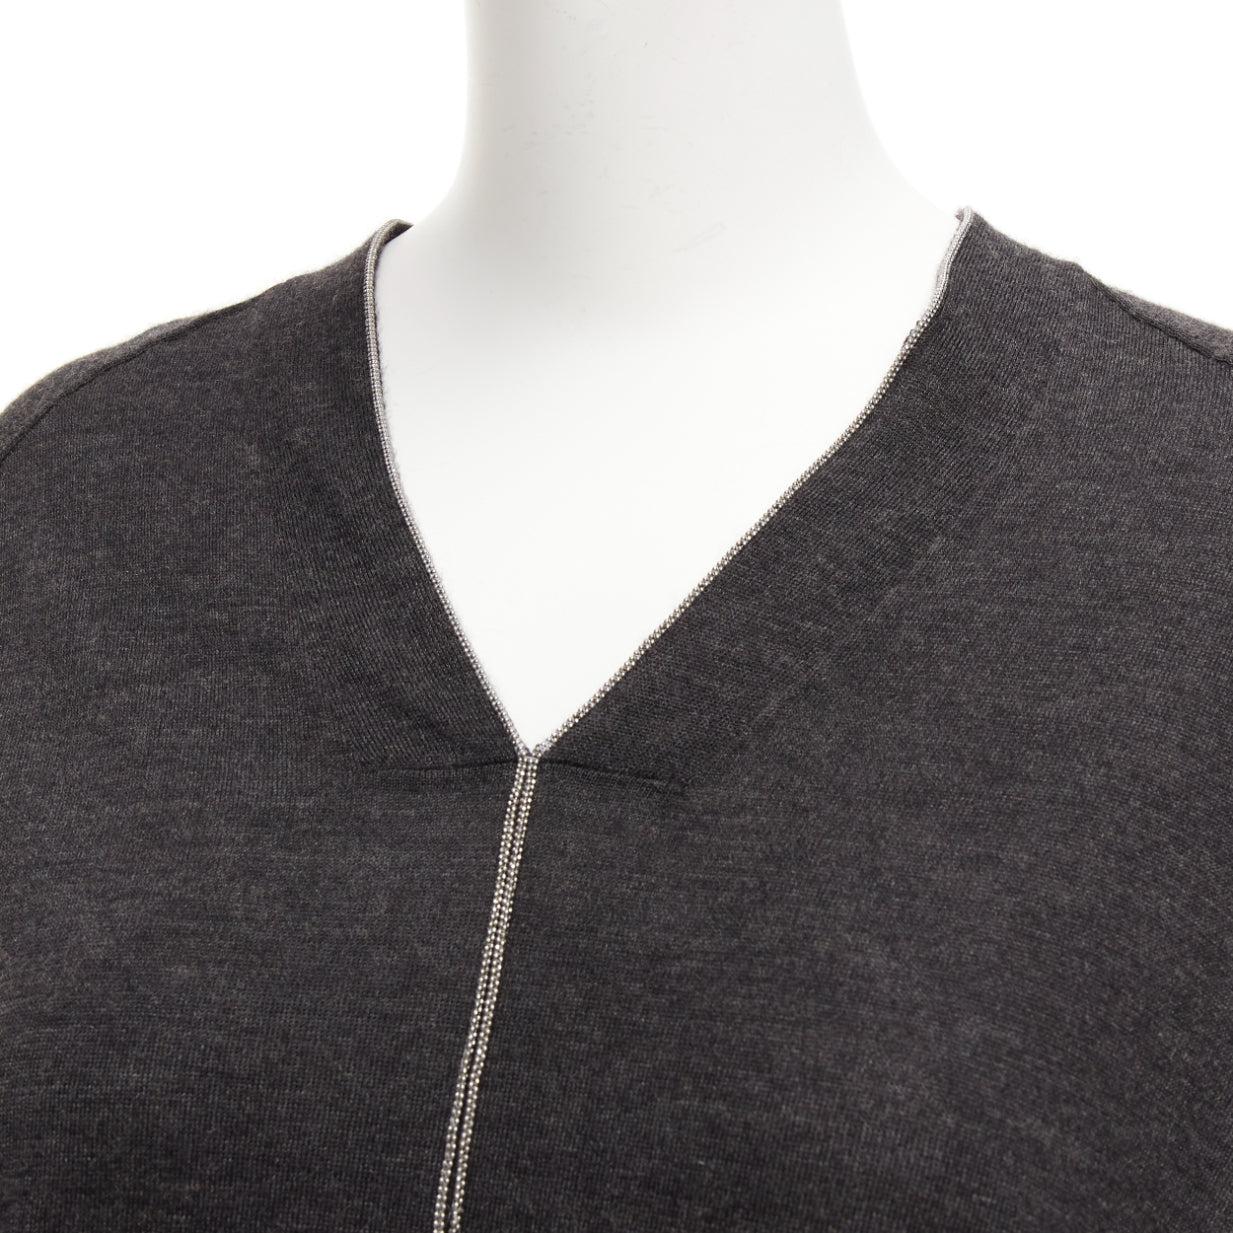 BRUNELLO CUCINELLI grey cashmere silk silver chain v neck cropped sweater XXS
Reference: EALU/A00023
Brand: Brunello Cucinelli
Material: Cashmere, Silk
Color: Grey, Silver
Pattern: Solid
Closure: Pullover
Made in: Italy

CONDITION:
Condition: Very